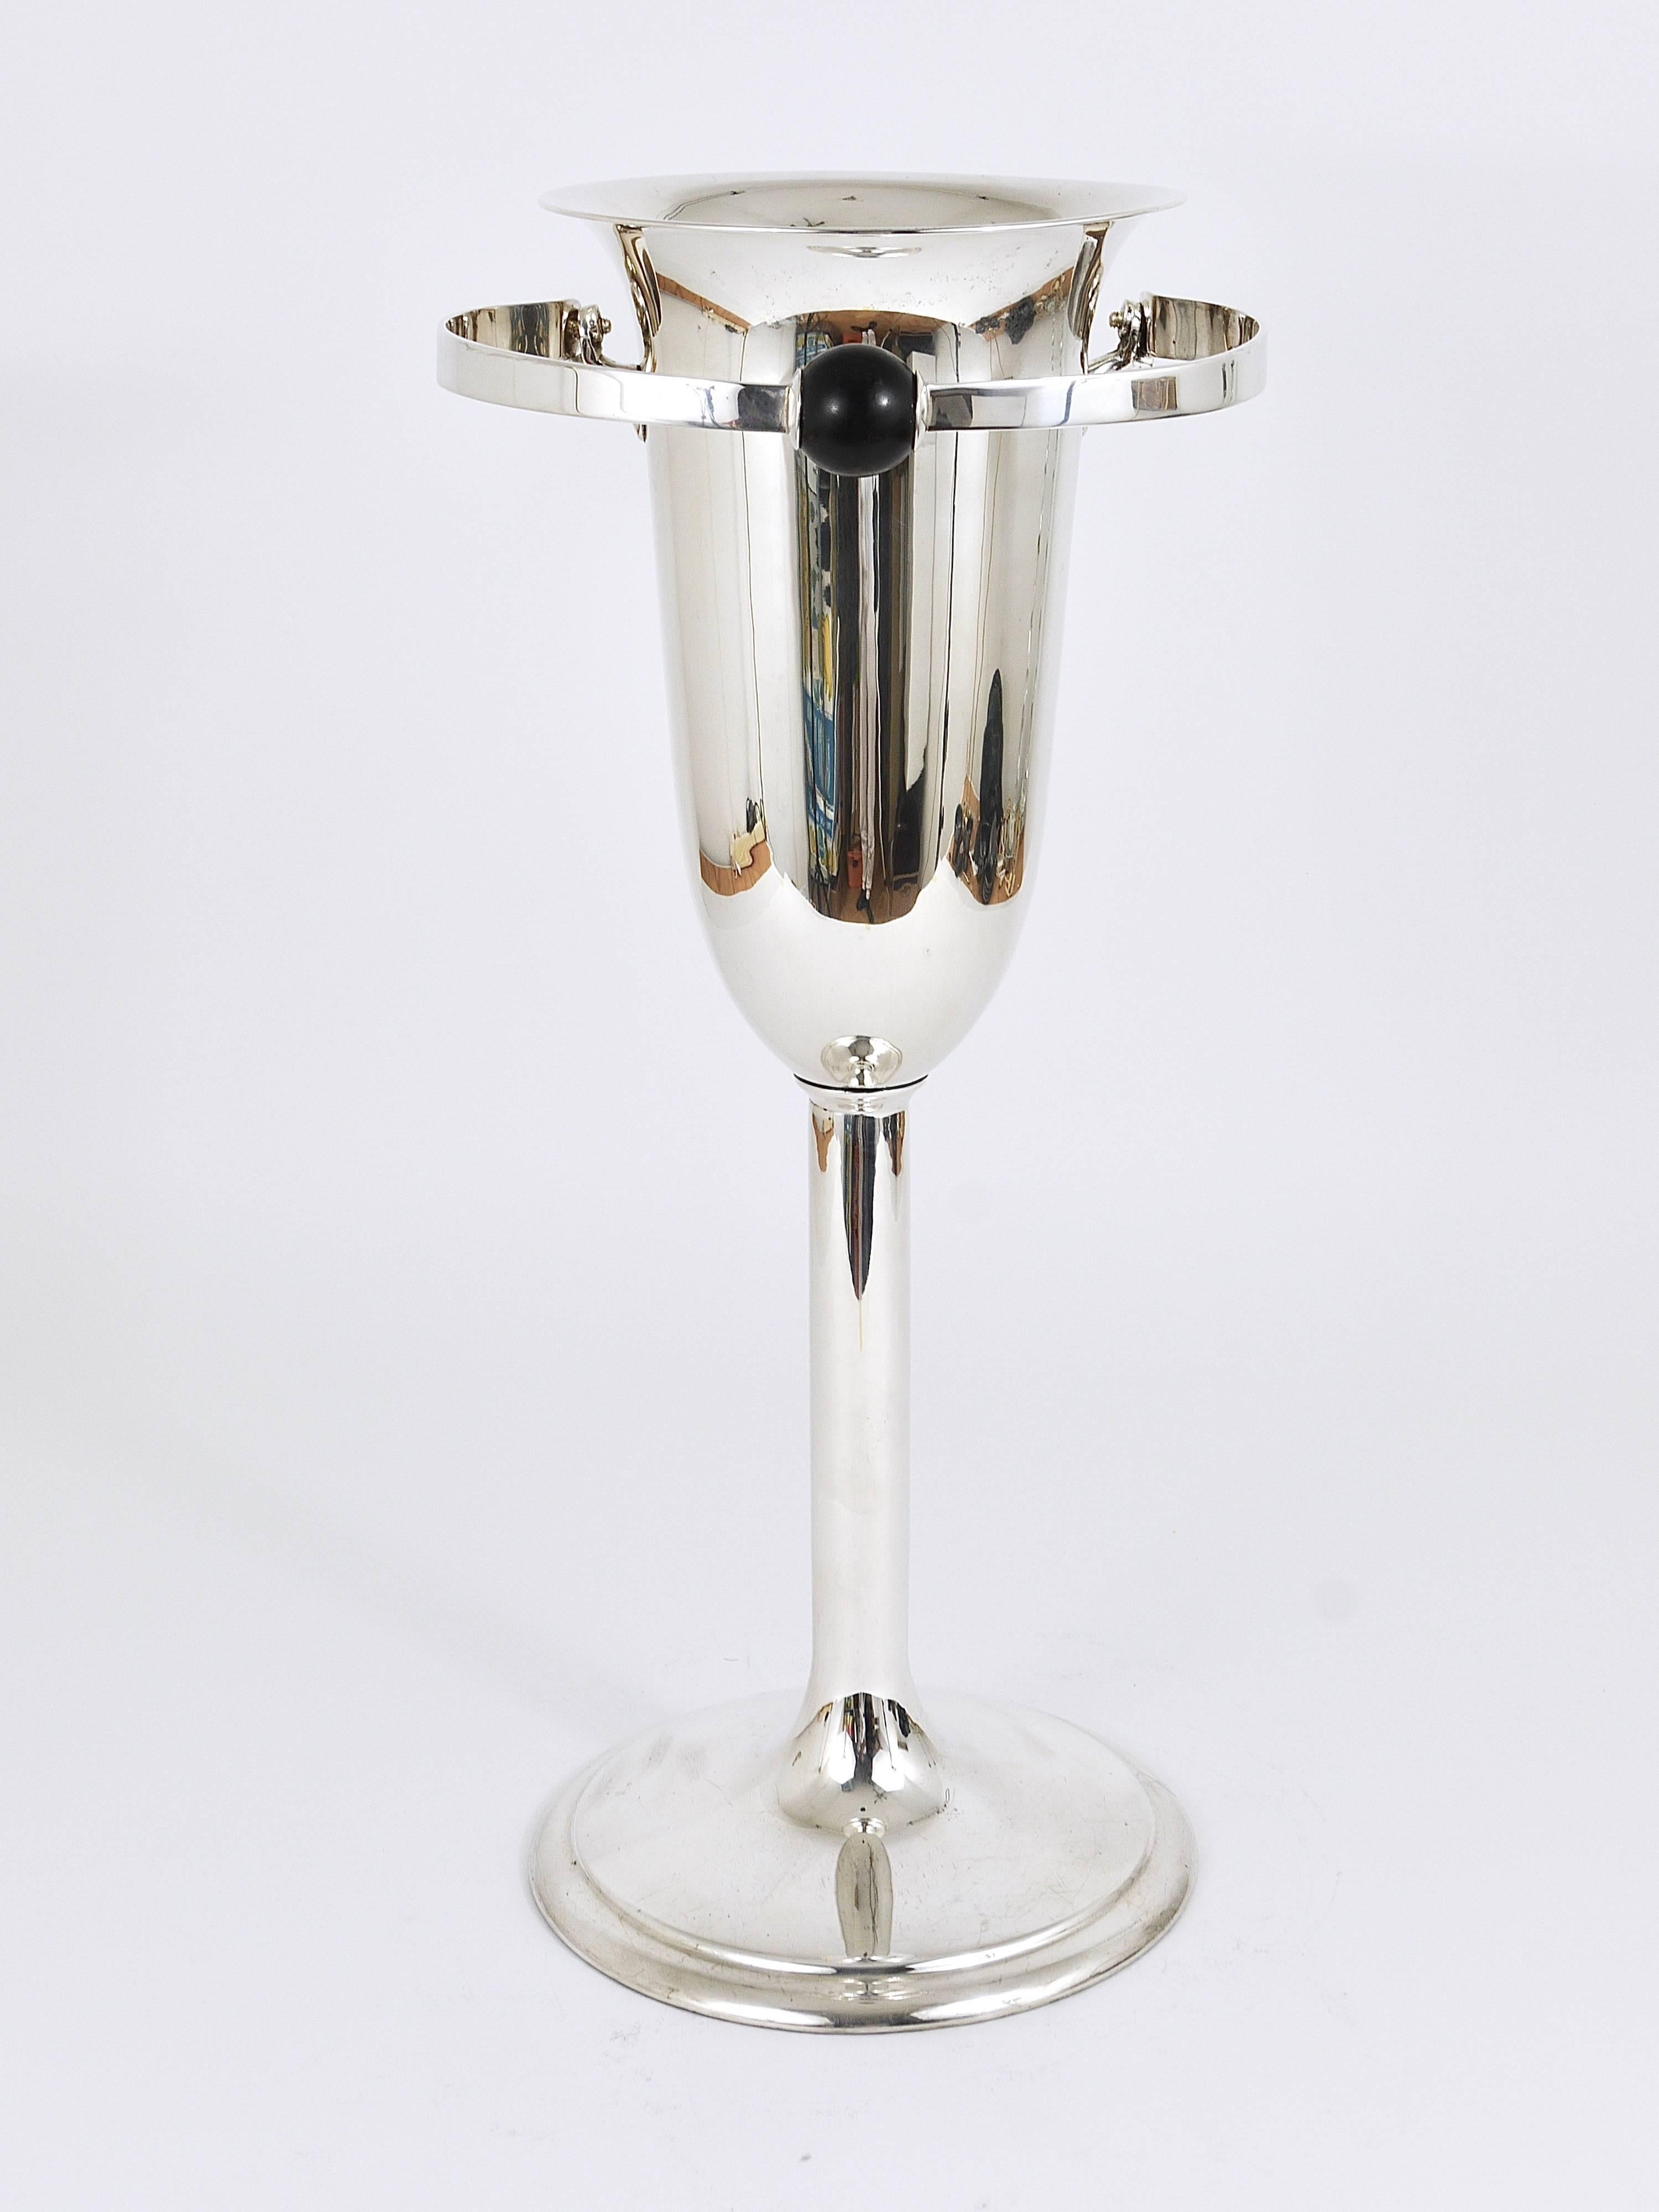 Silver Plate French Art Deco Floor Standing Wine orChampagne Cooler Ice Bucket, Silver, 1930s